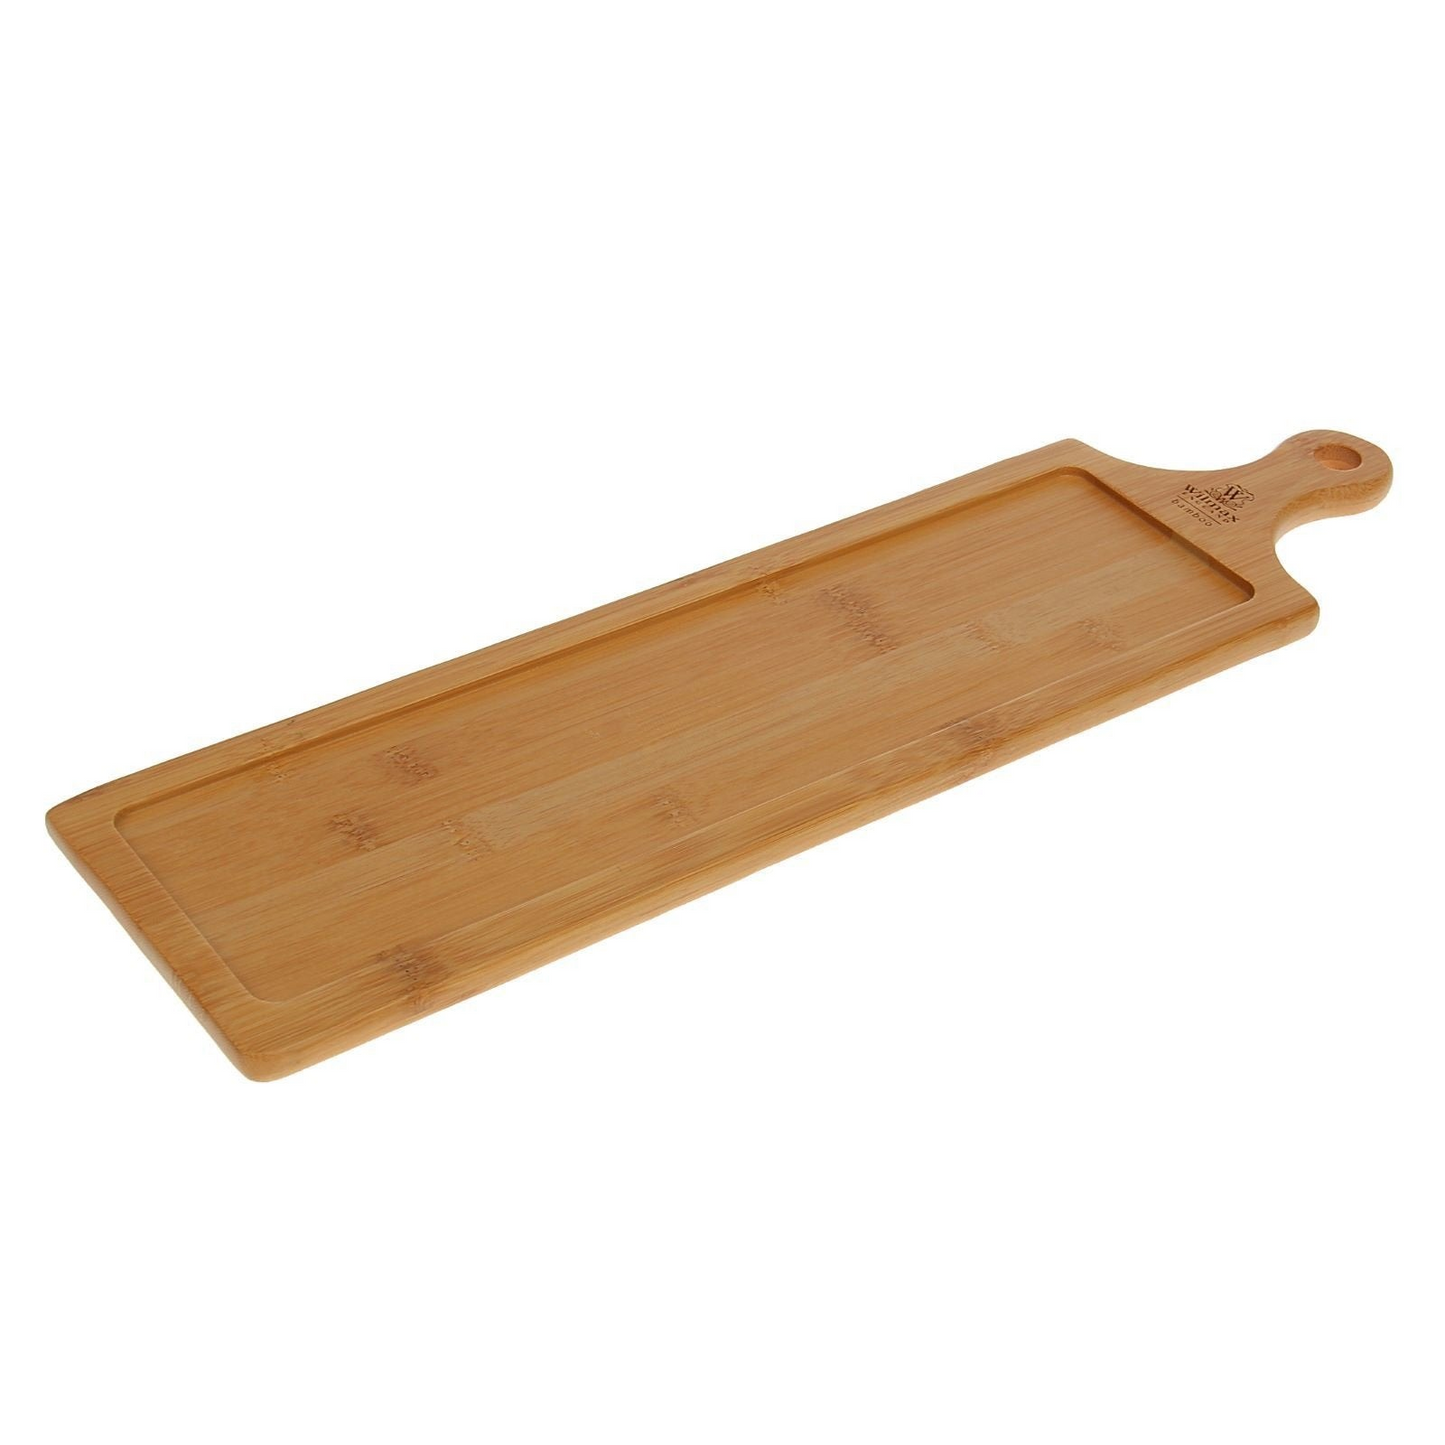 Wilmax [A] Natural Bamboo Tray 18" X 4.75" | 45.5 X 12 Cm WL-771009/A